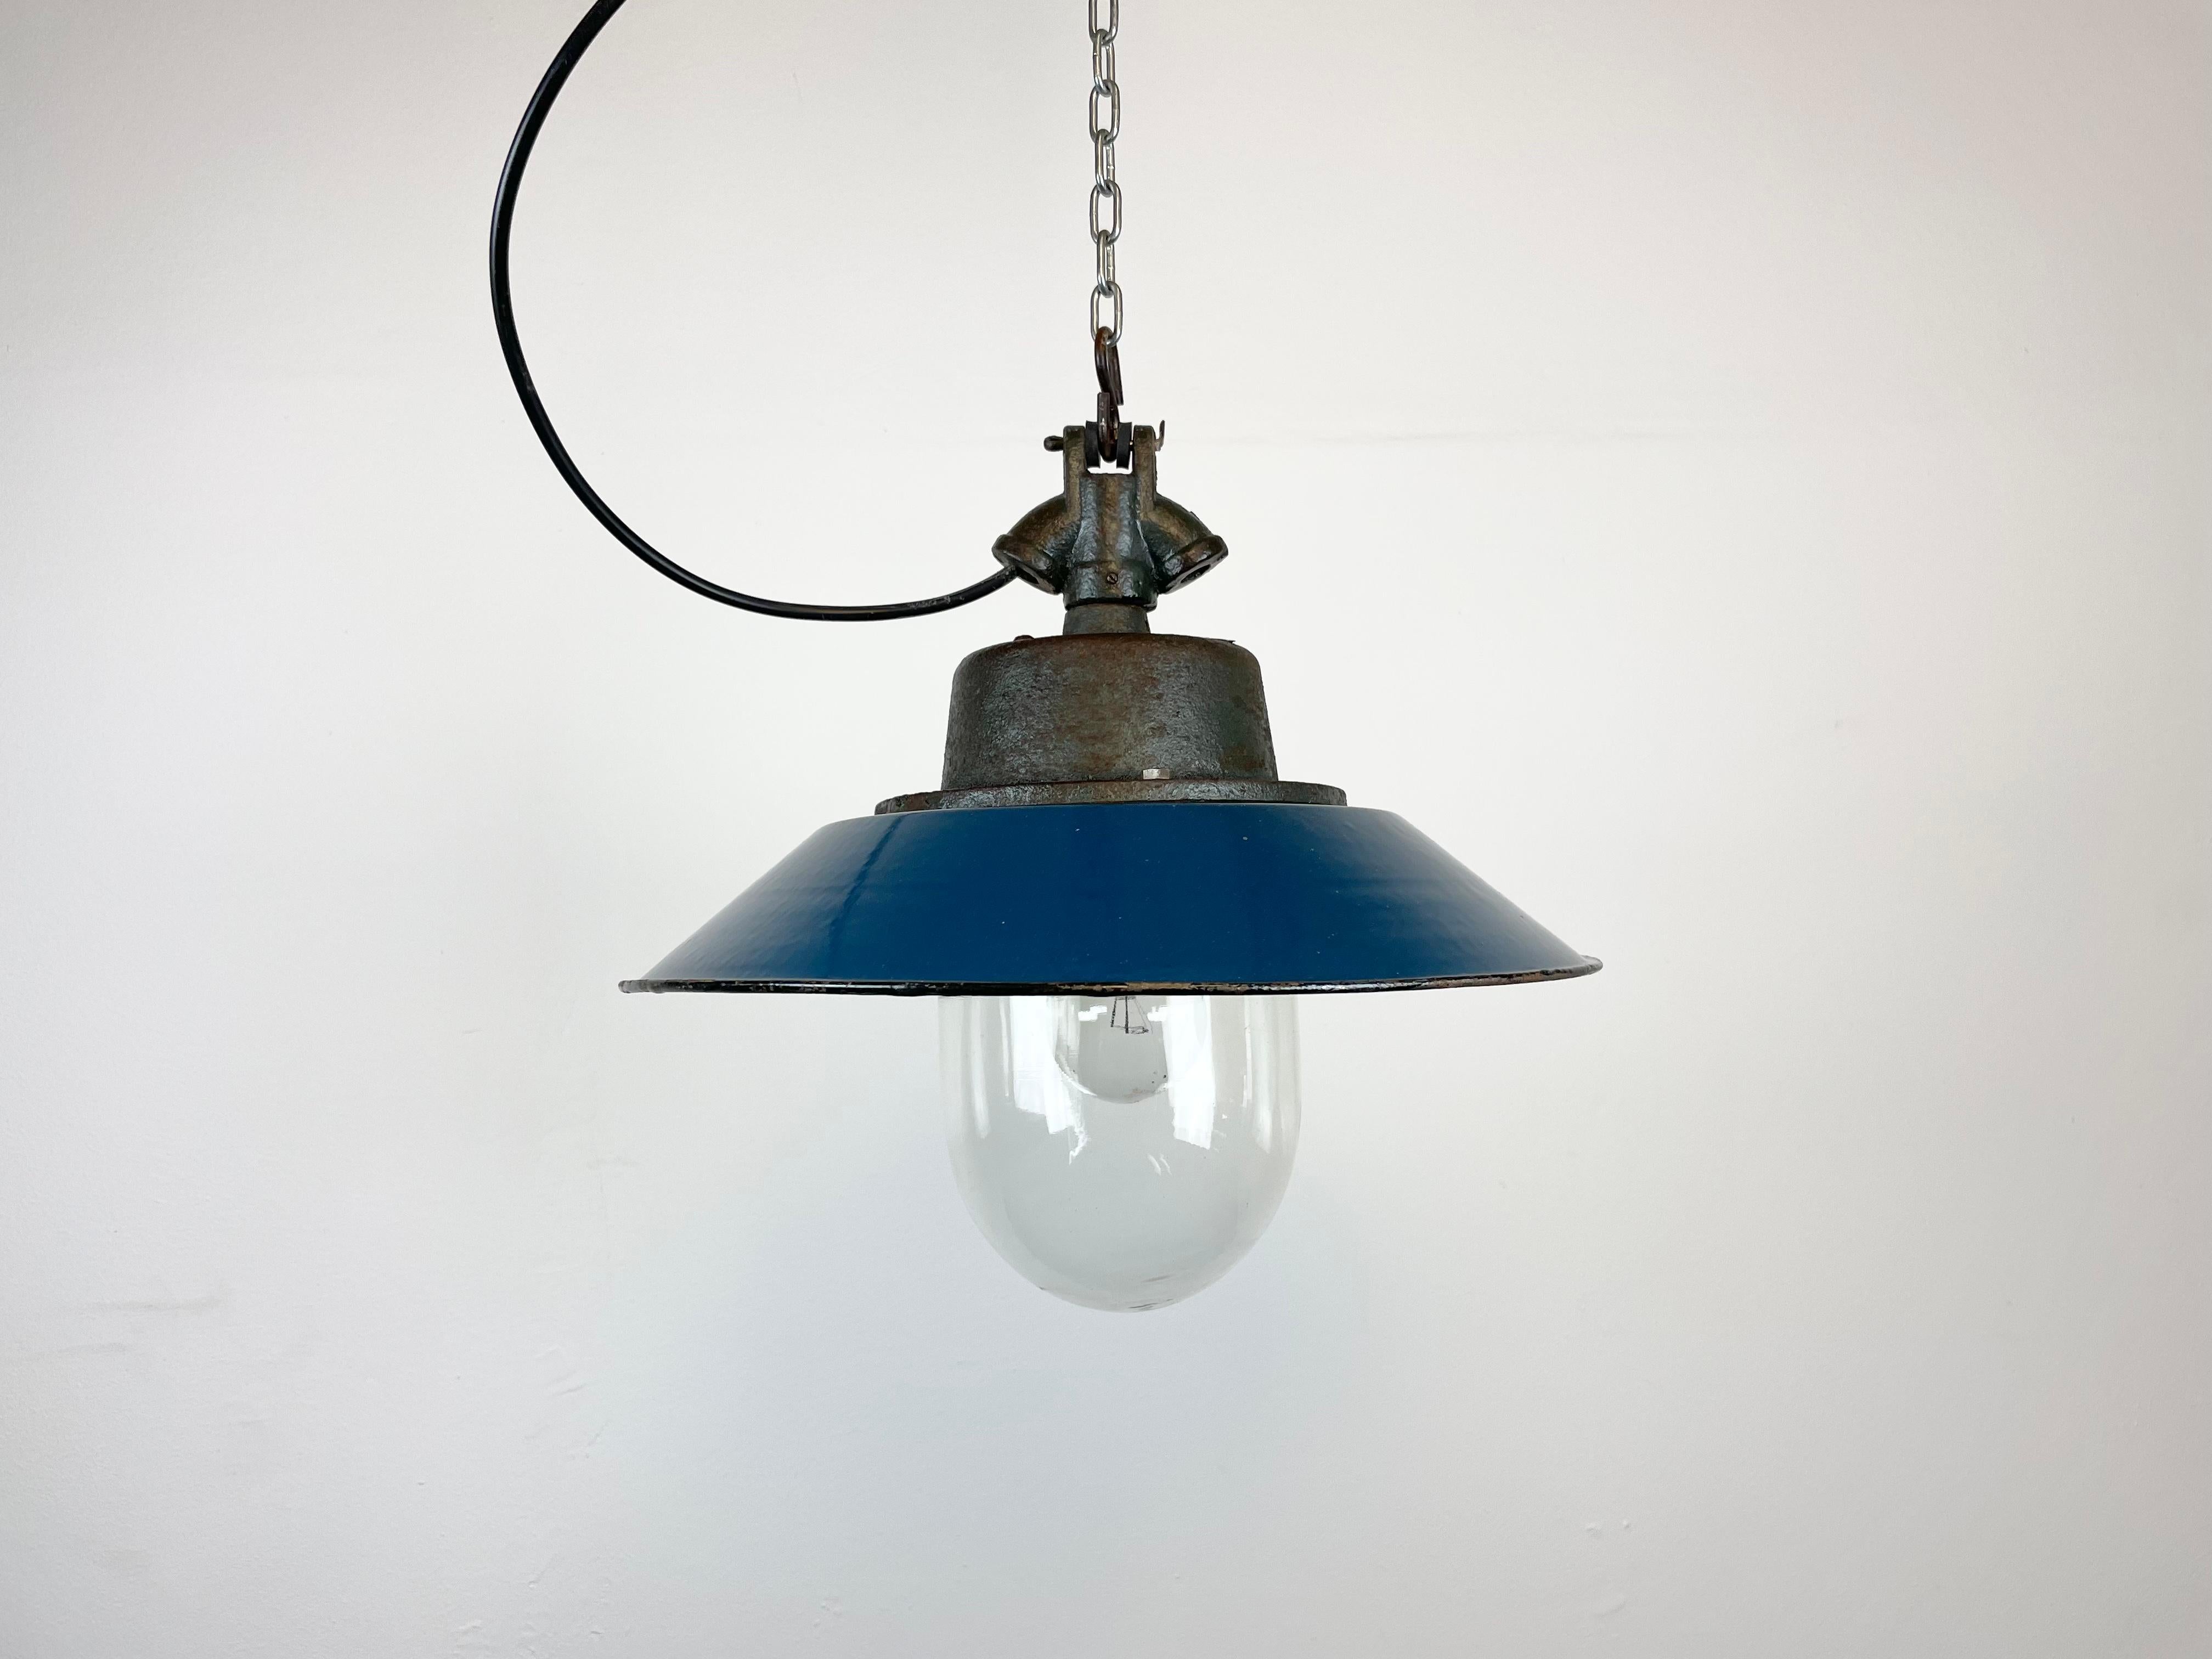 Industrial hanging lamp manufactured in Poland during the 1960s. It features a blue enamel shade, white enamel interior, cast iron top and clear glass cover. Porcelain socket for E 27 light bulbs and new wire. The weight of the lamp is 3 kg.